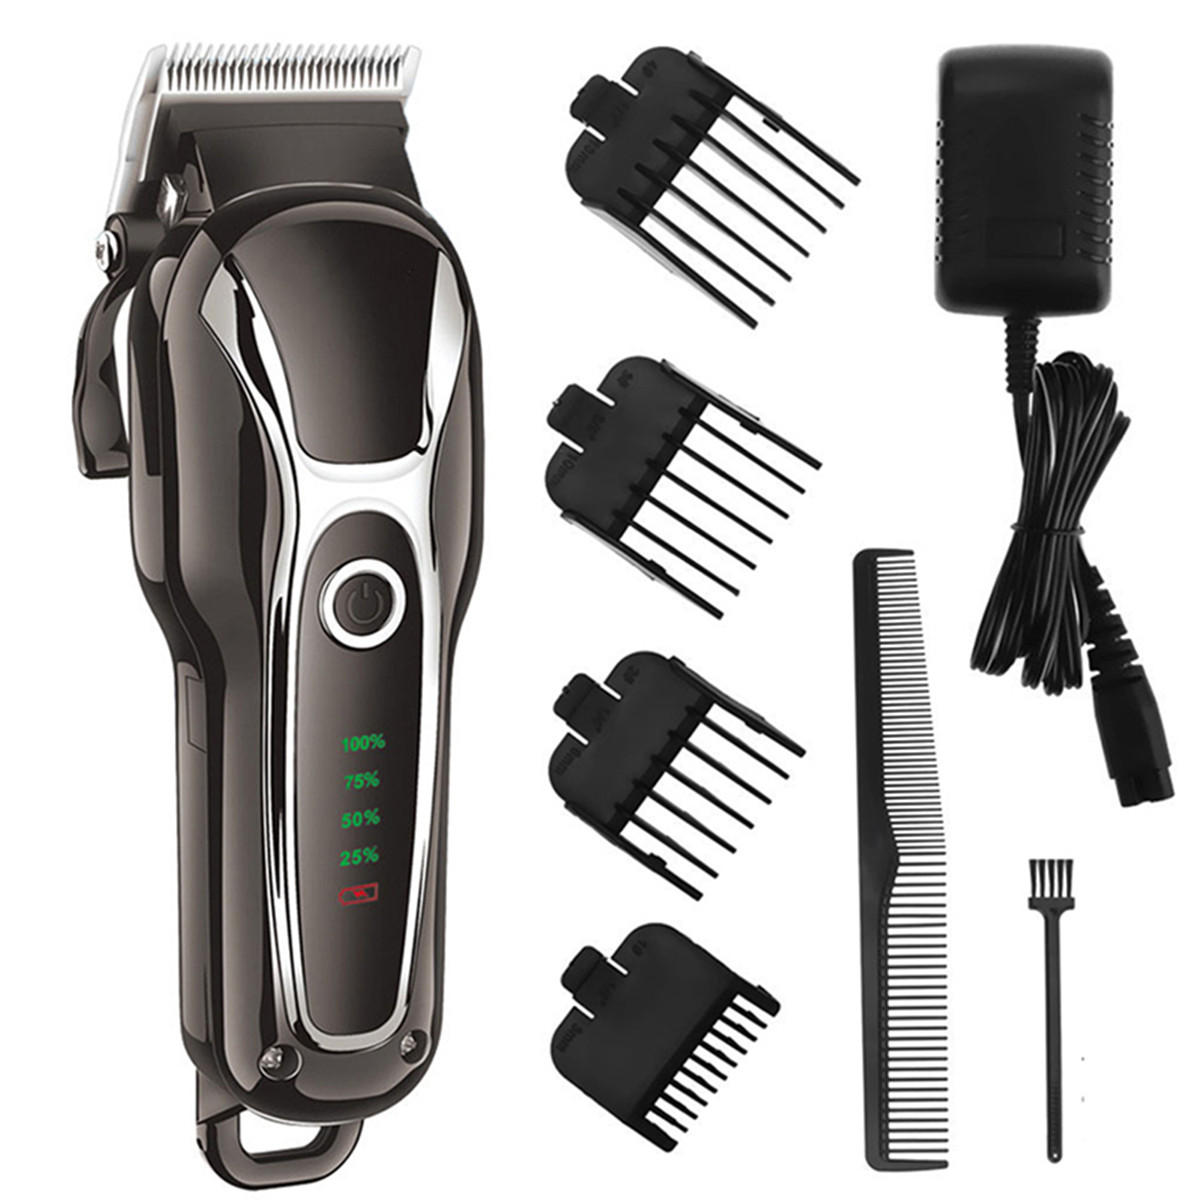 

SURKER Barber Salon Electric Hair Clipper Rechargeable Trimmer Beard Body Shaver Grooming Razor LED Display Steel Blade